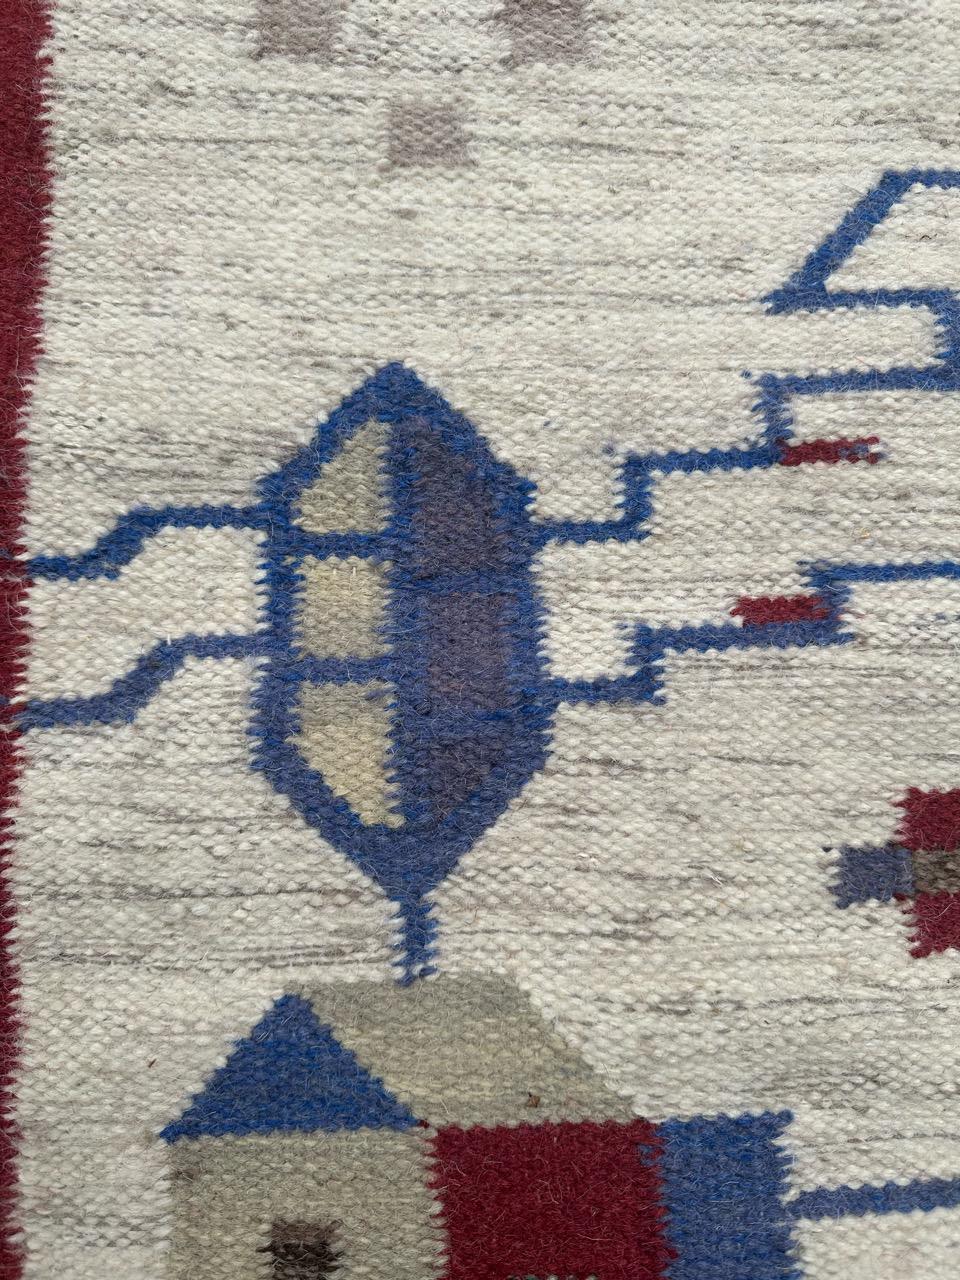 Wool Bobyrug’s Pretty Vintage Woven Polish Tapestry For Sale